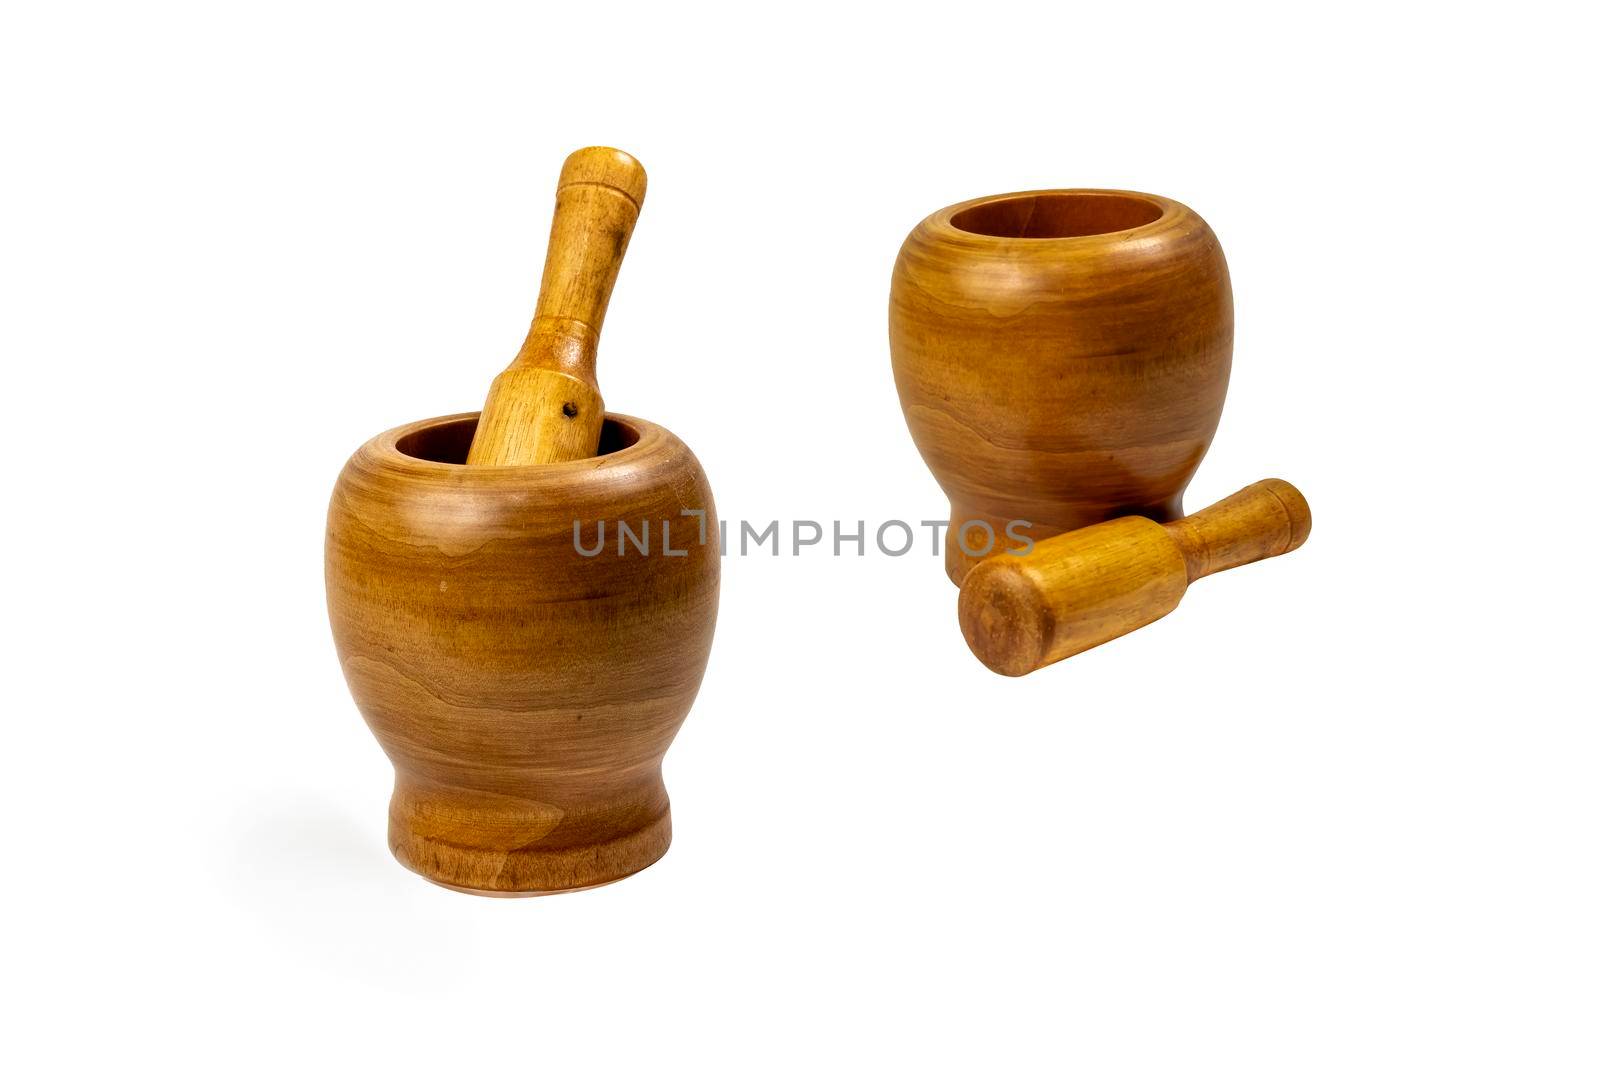 Wooden mortar and pestle against white background by ben44